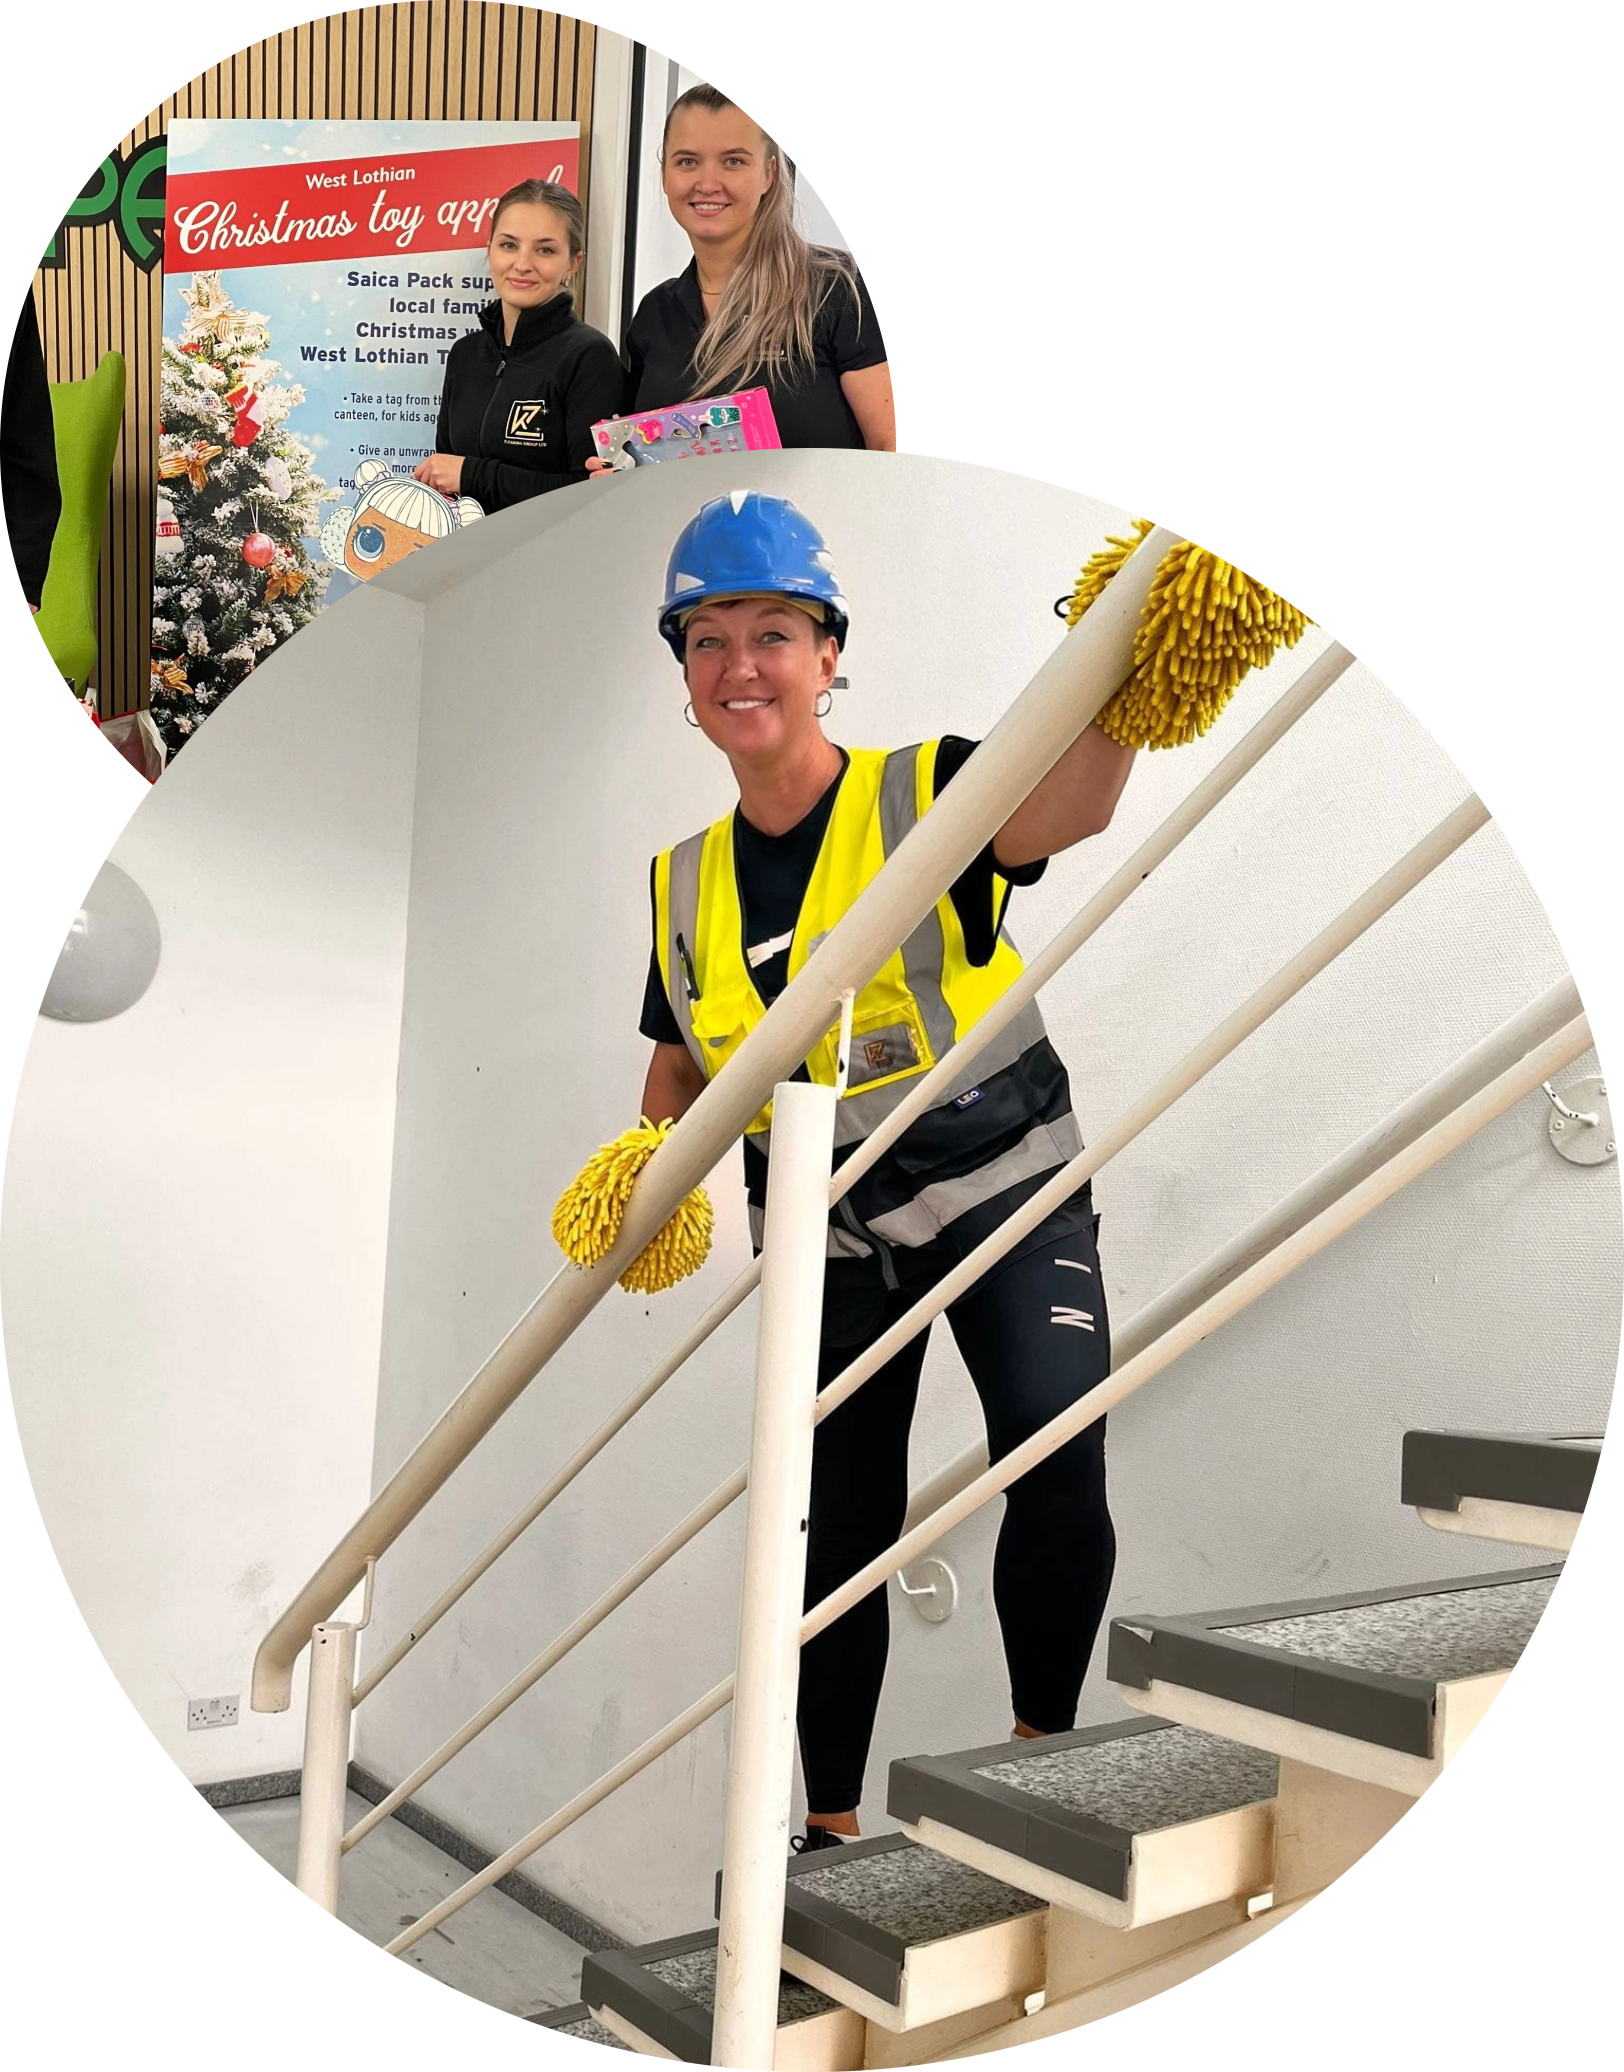 Two circle images, one large with a woman wearing a Hi-Viz vets and a blue helmet cleaning an staircase and a smaller circle image with two young women standing by a sign